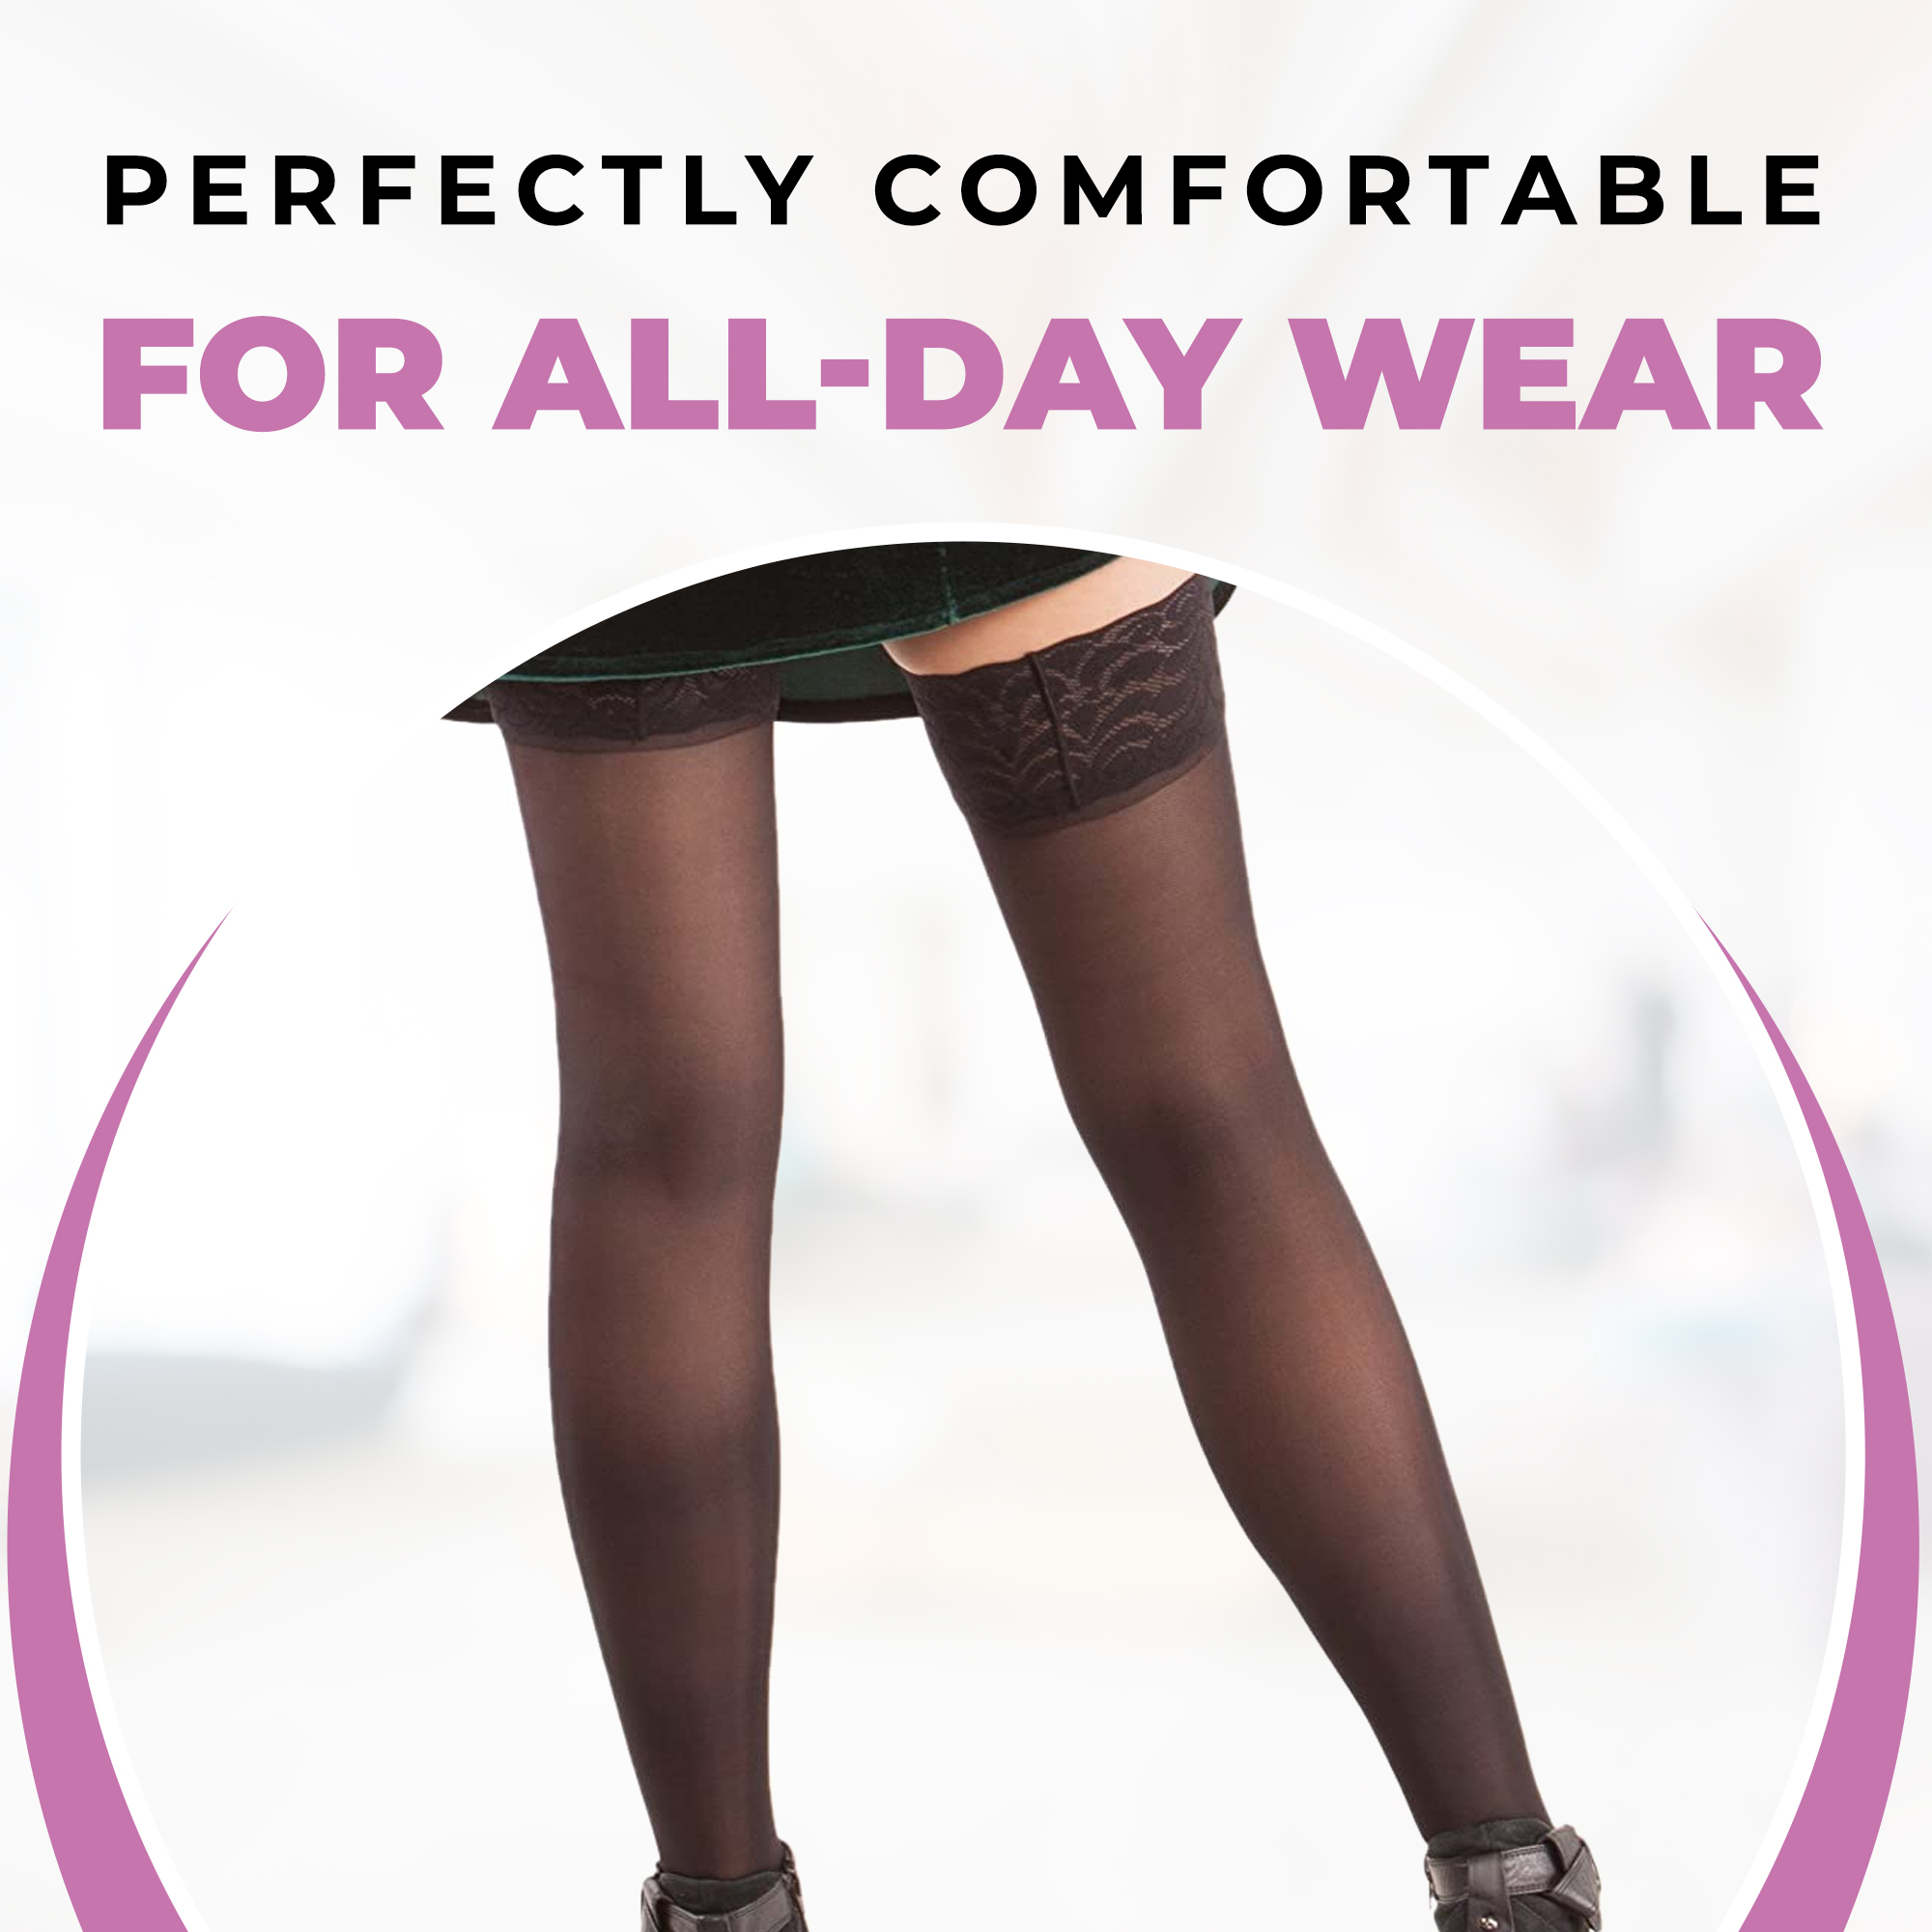 Ita Med Sheer Thigh High Firm Graduated Compression Stockings For Women 23 30 Mmhg H 80